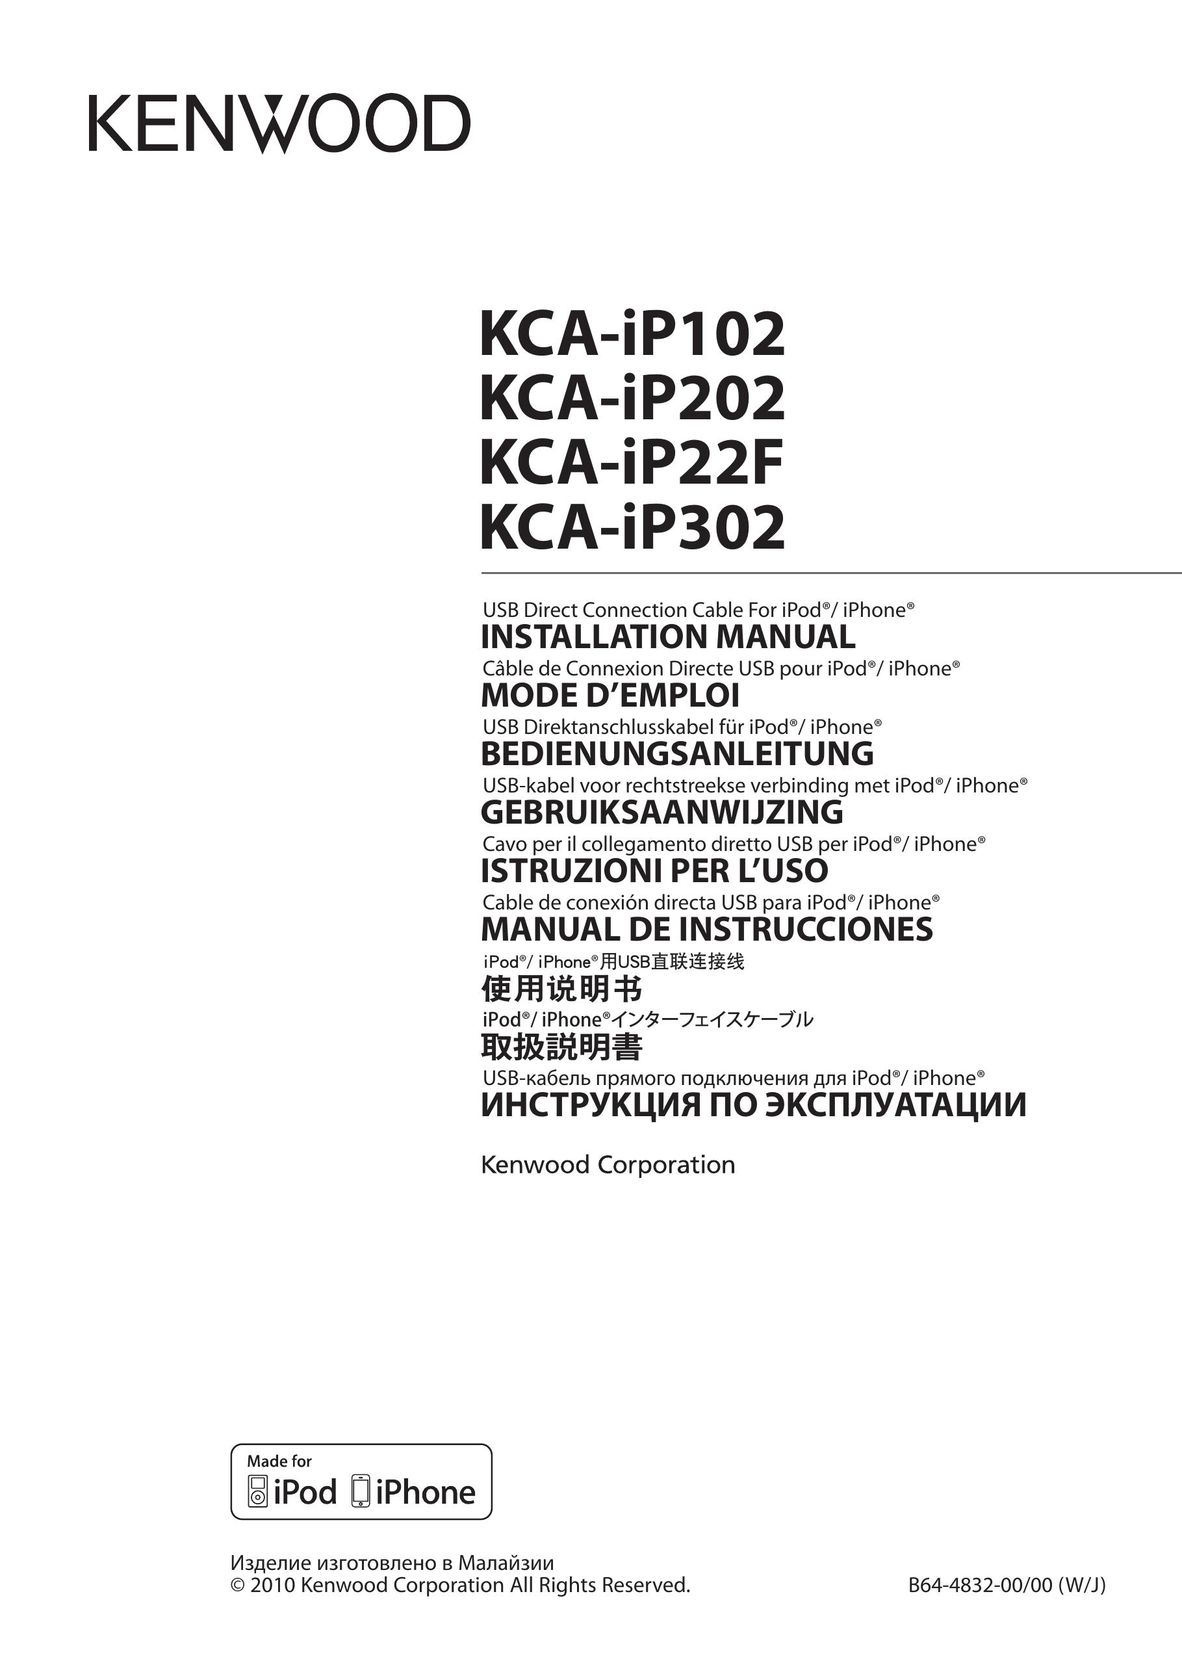 Kenwood KCA-iP102 Network Cables User Manual